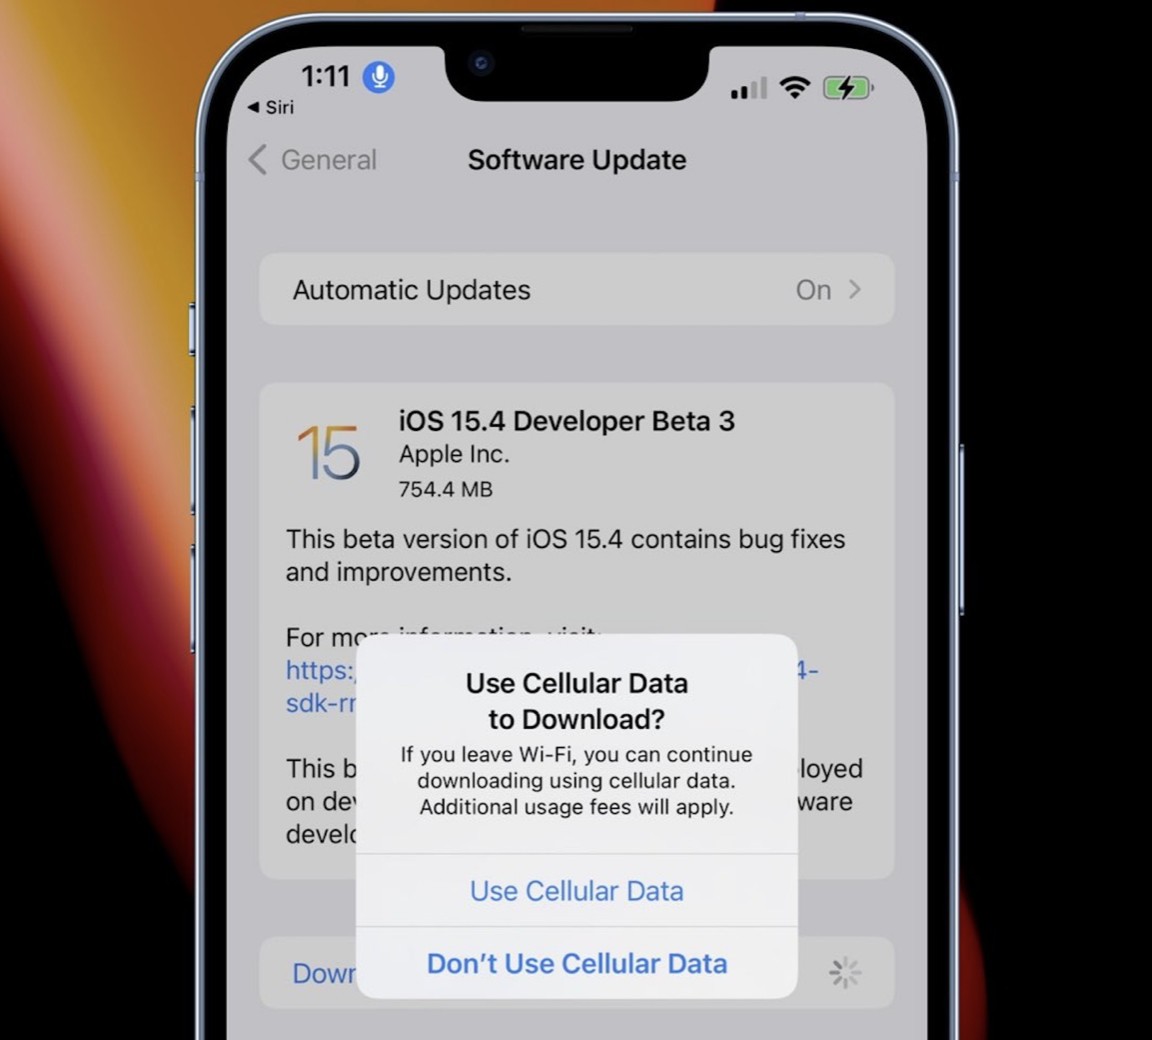 Download the iOS 154 iOS update to 4G